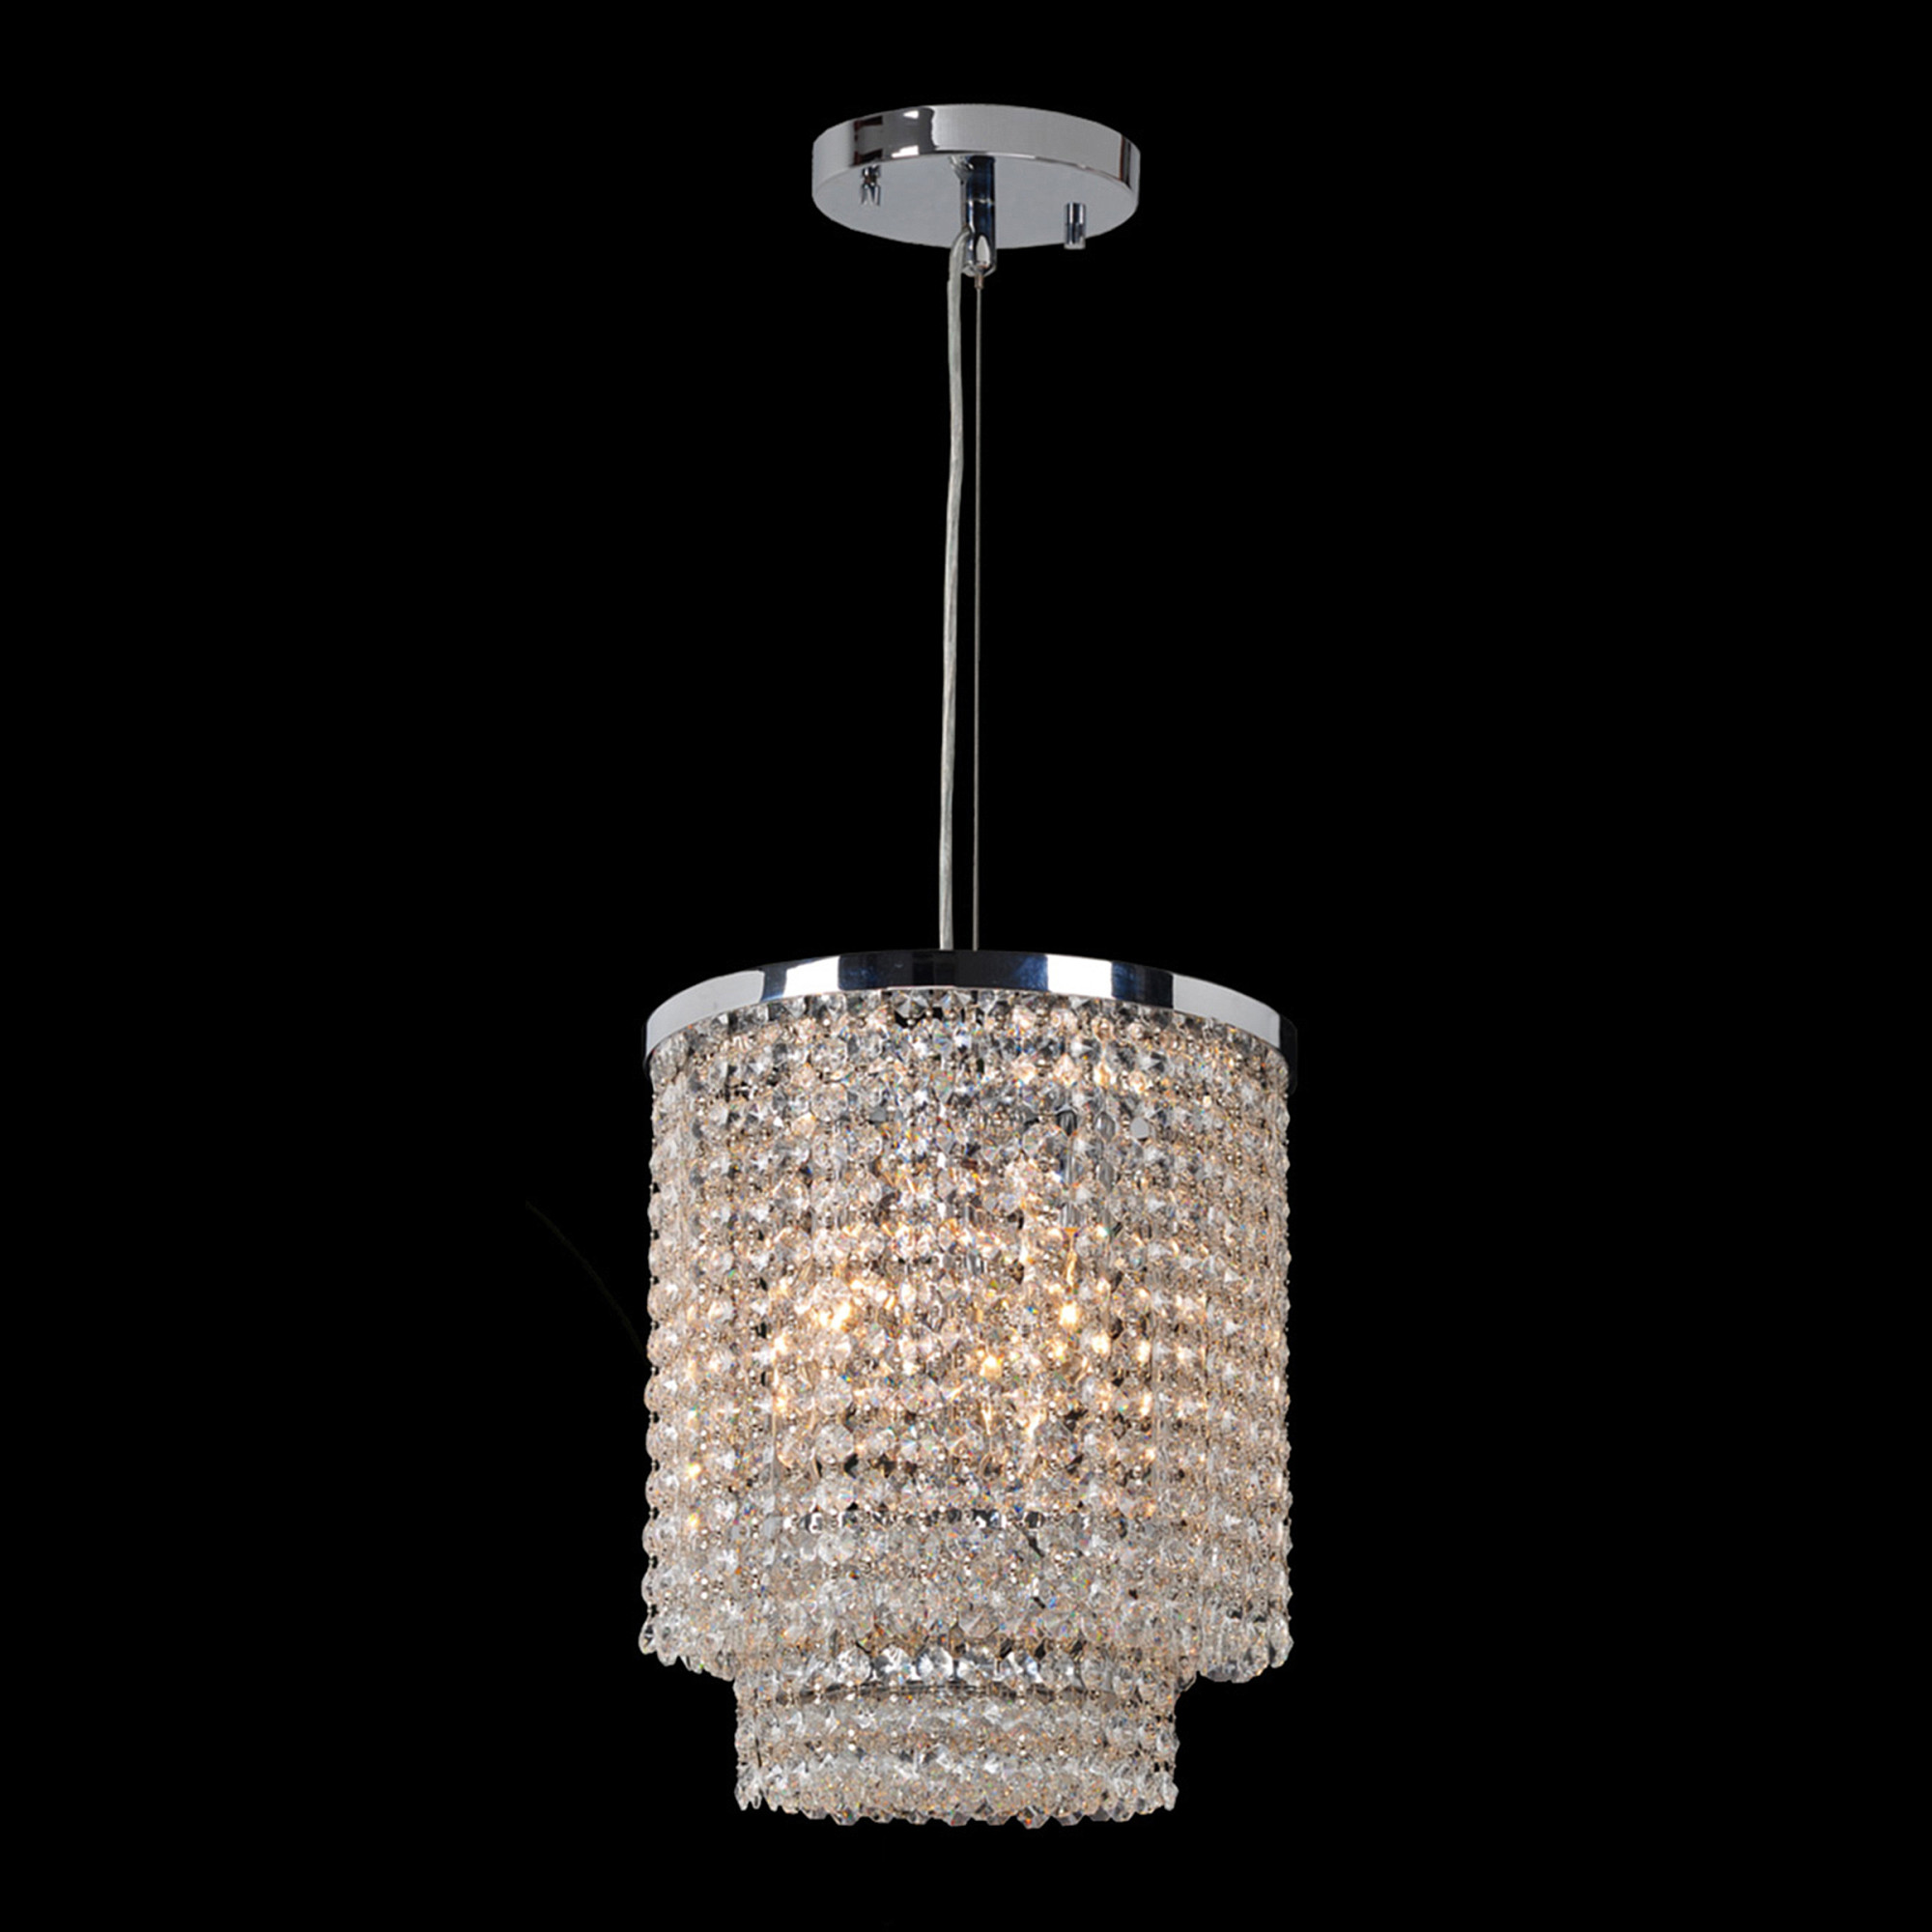 Prism Collection 3 Light Chrome Finish and Clear Crystal Oval Pendant 10" L x 6" W x 12" H Small